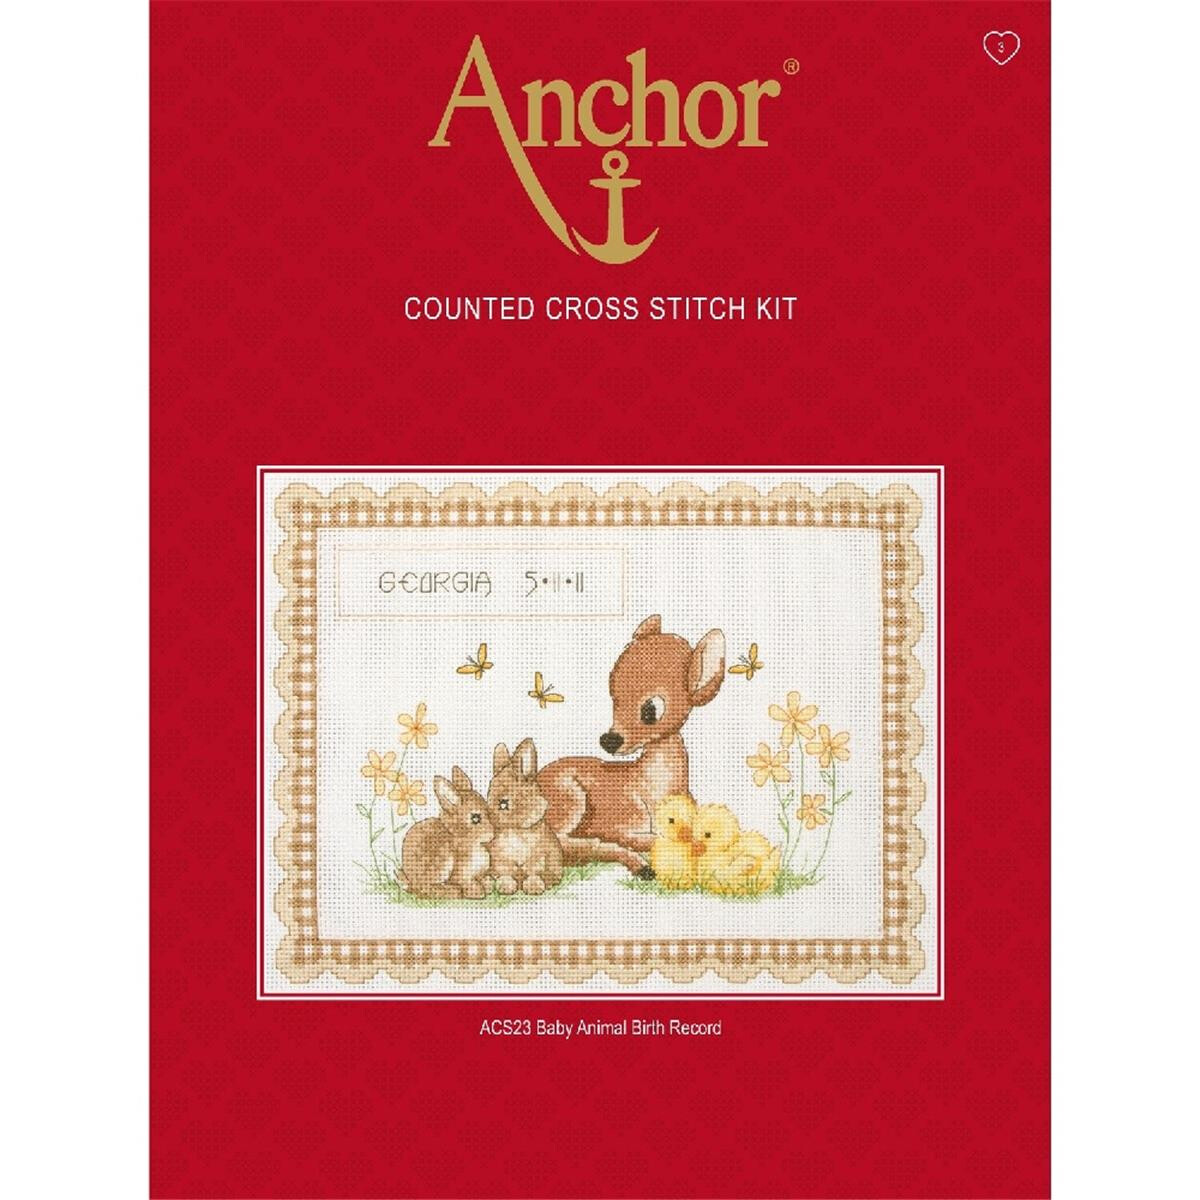 Anchor counted Cross Stitch kit "Baby Animal Birth...